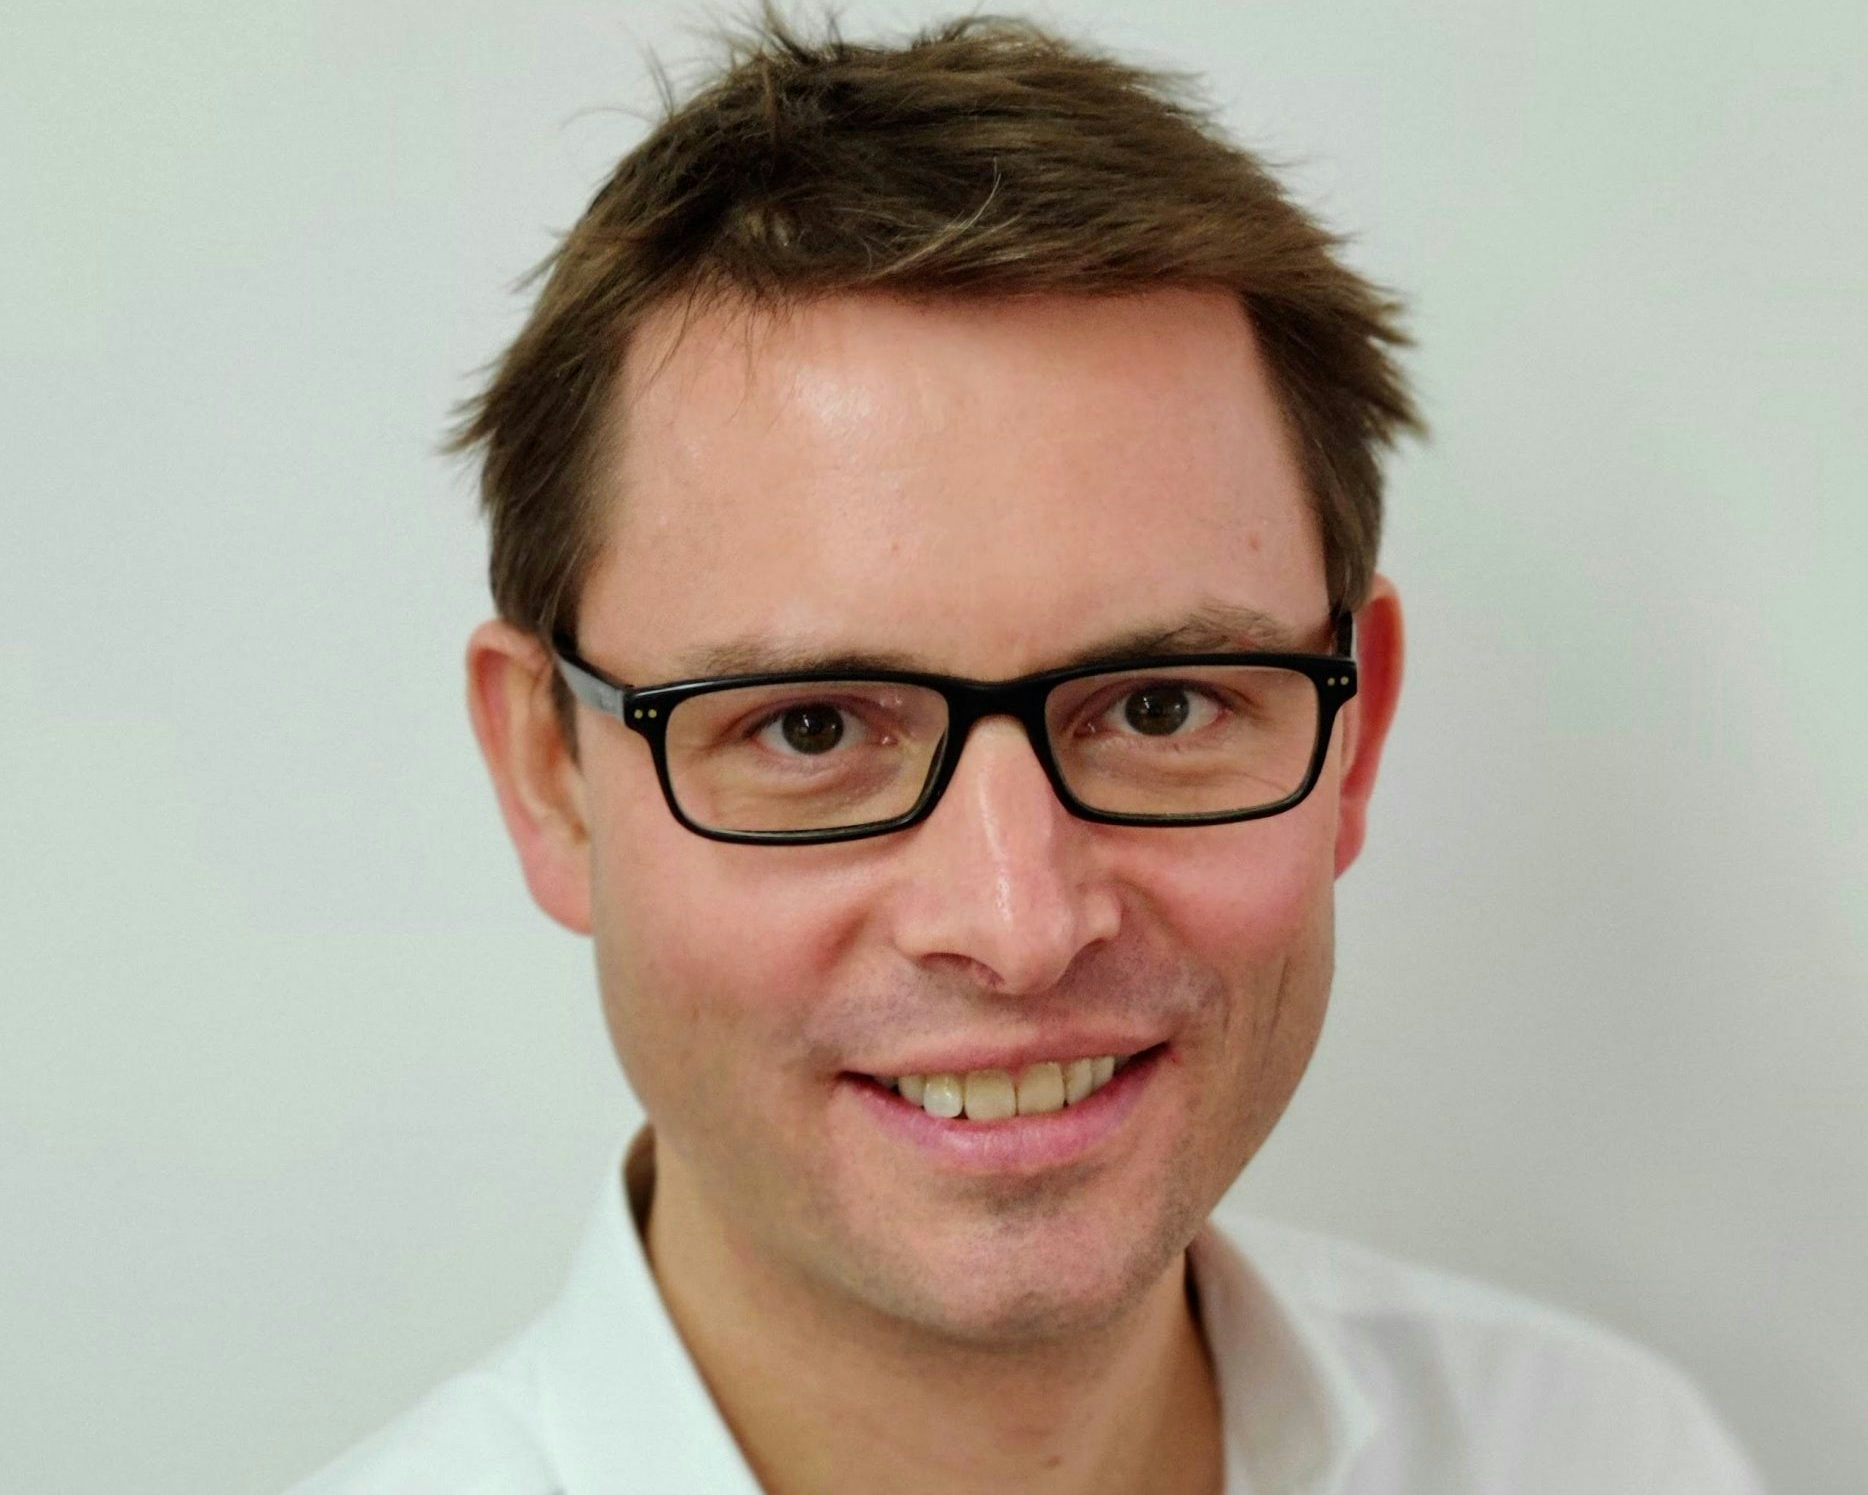 A photo of Will Neale, one of Europe's top fintech angel investors